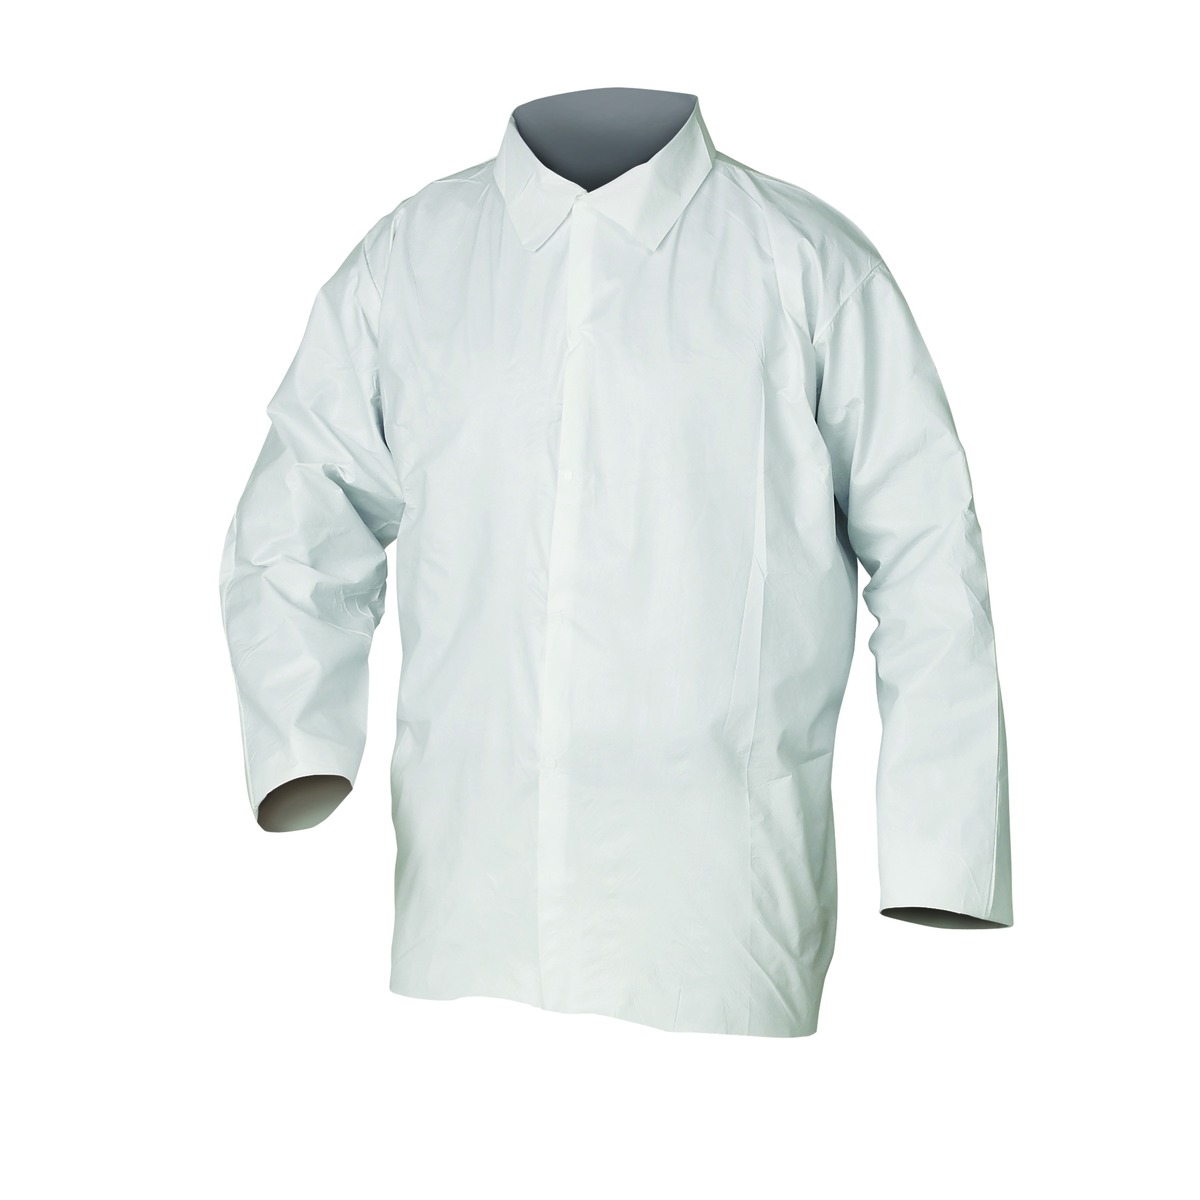 Kimberly-Clark Professional™ X-Large White KleenGuard™ A20 SMMMS Disposable Shirt (Availability restrictions apply.)